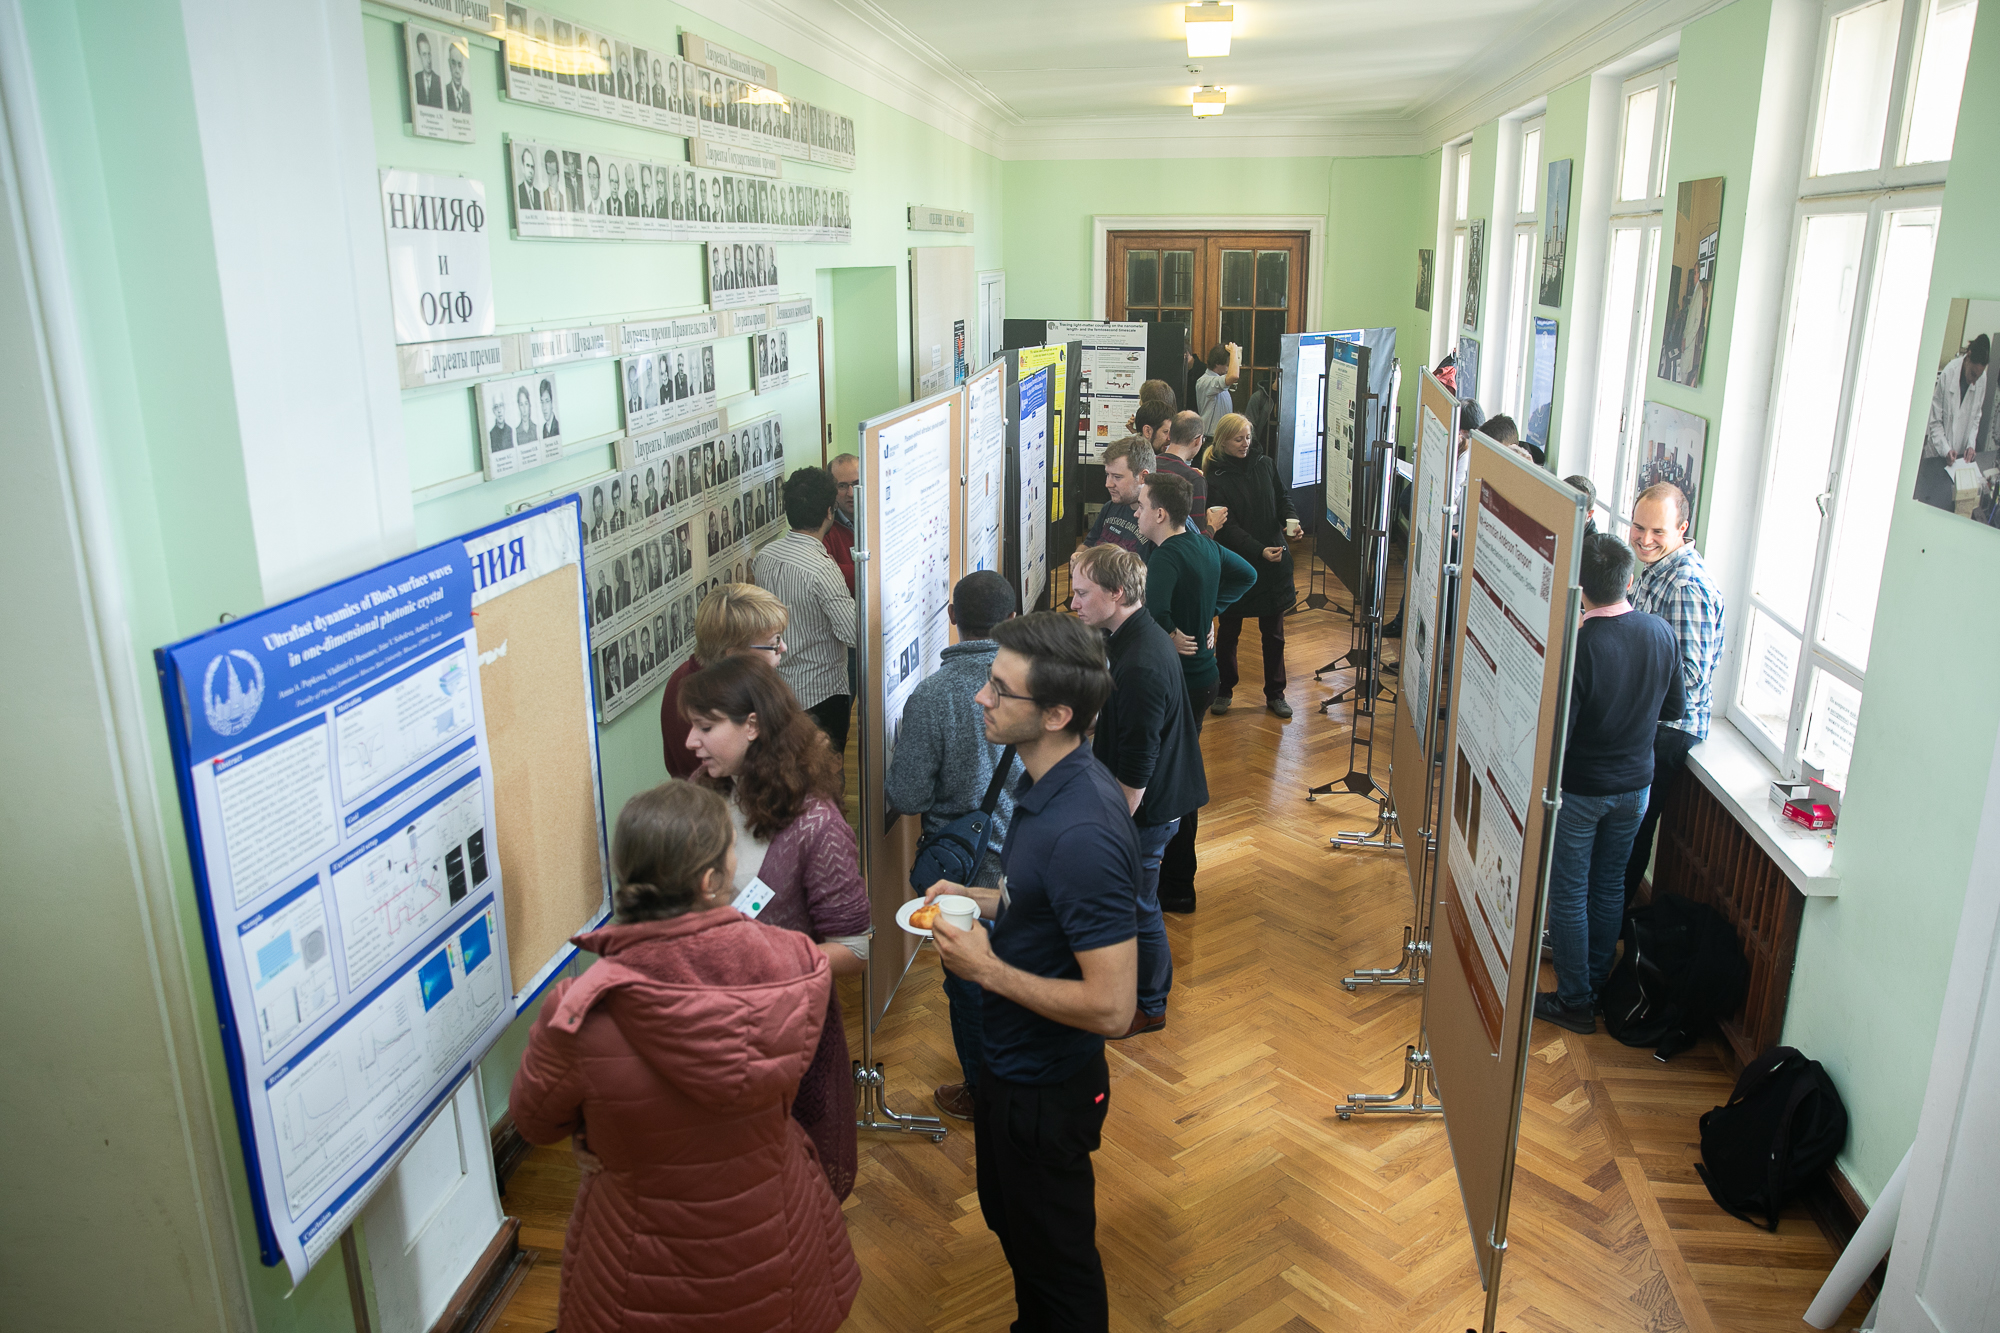 Poster session for early career researchers